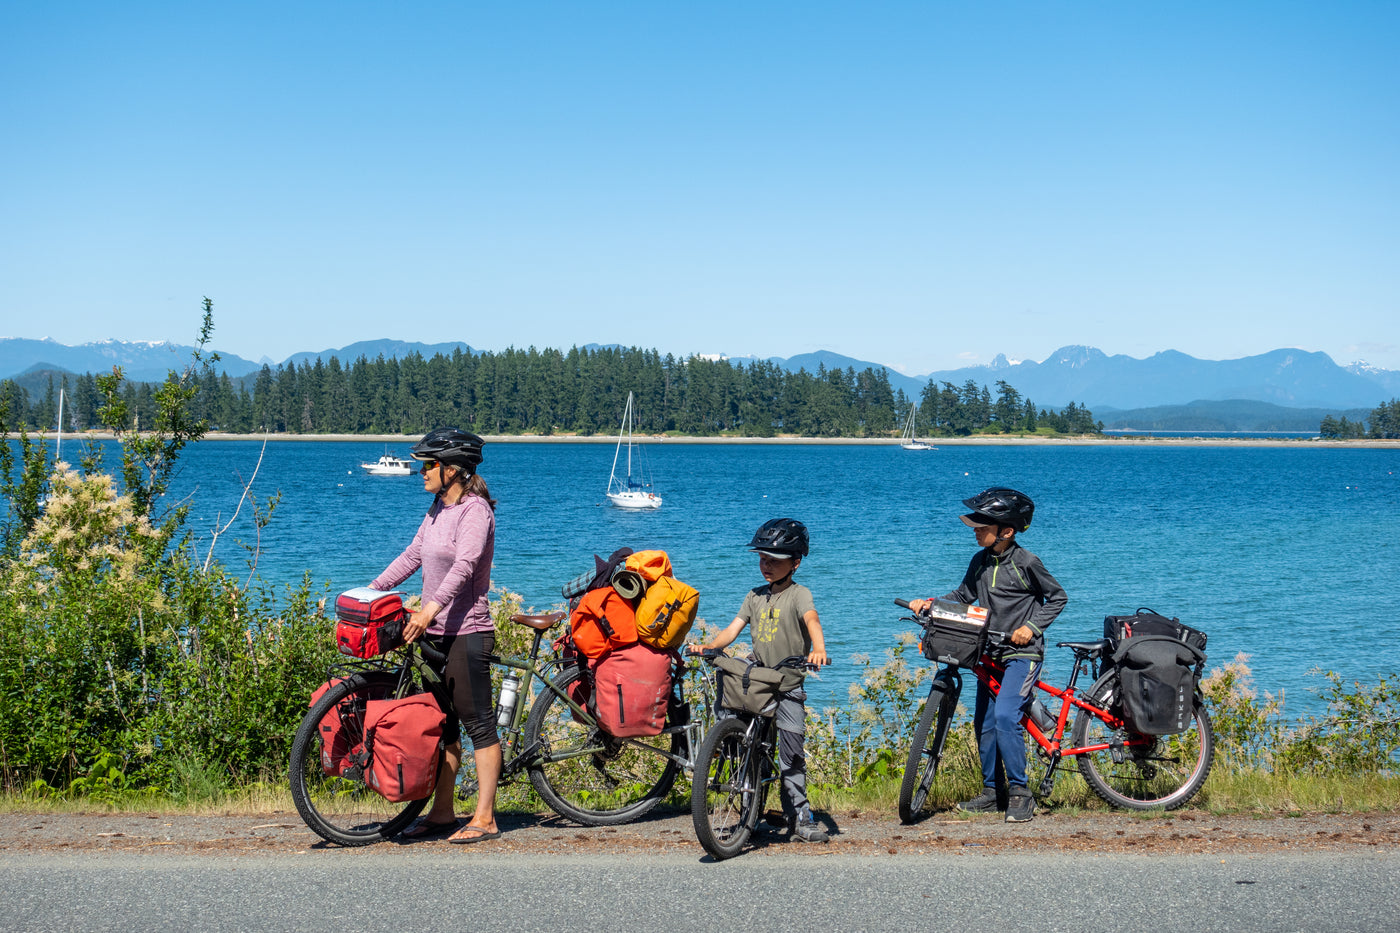 Six questions for a family travelling by bike